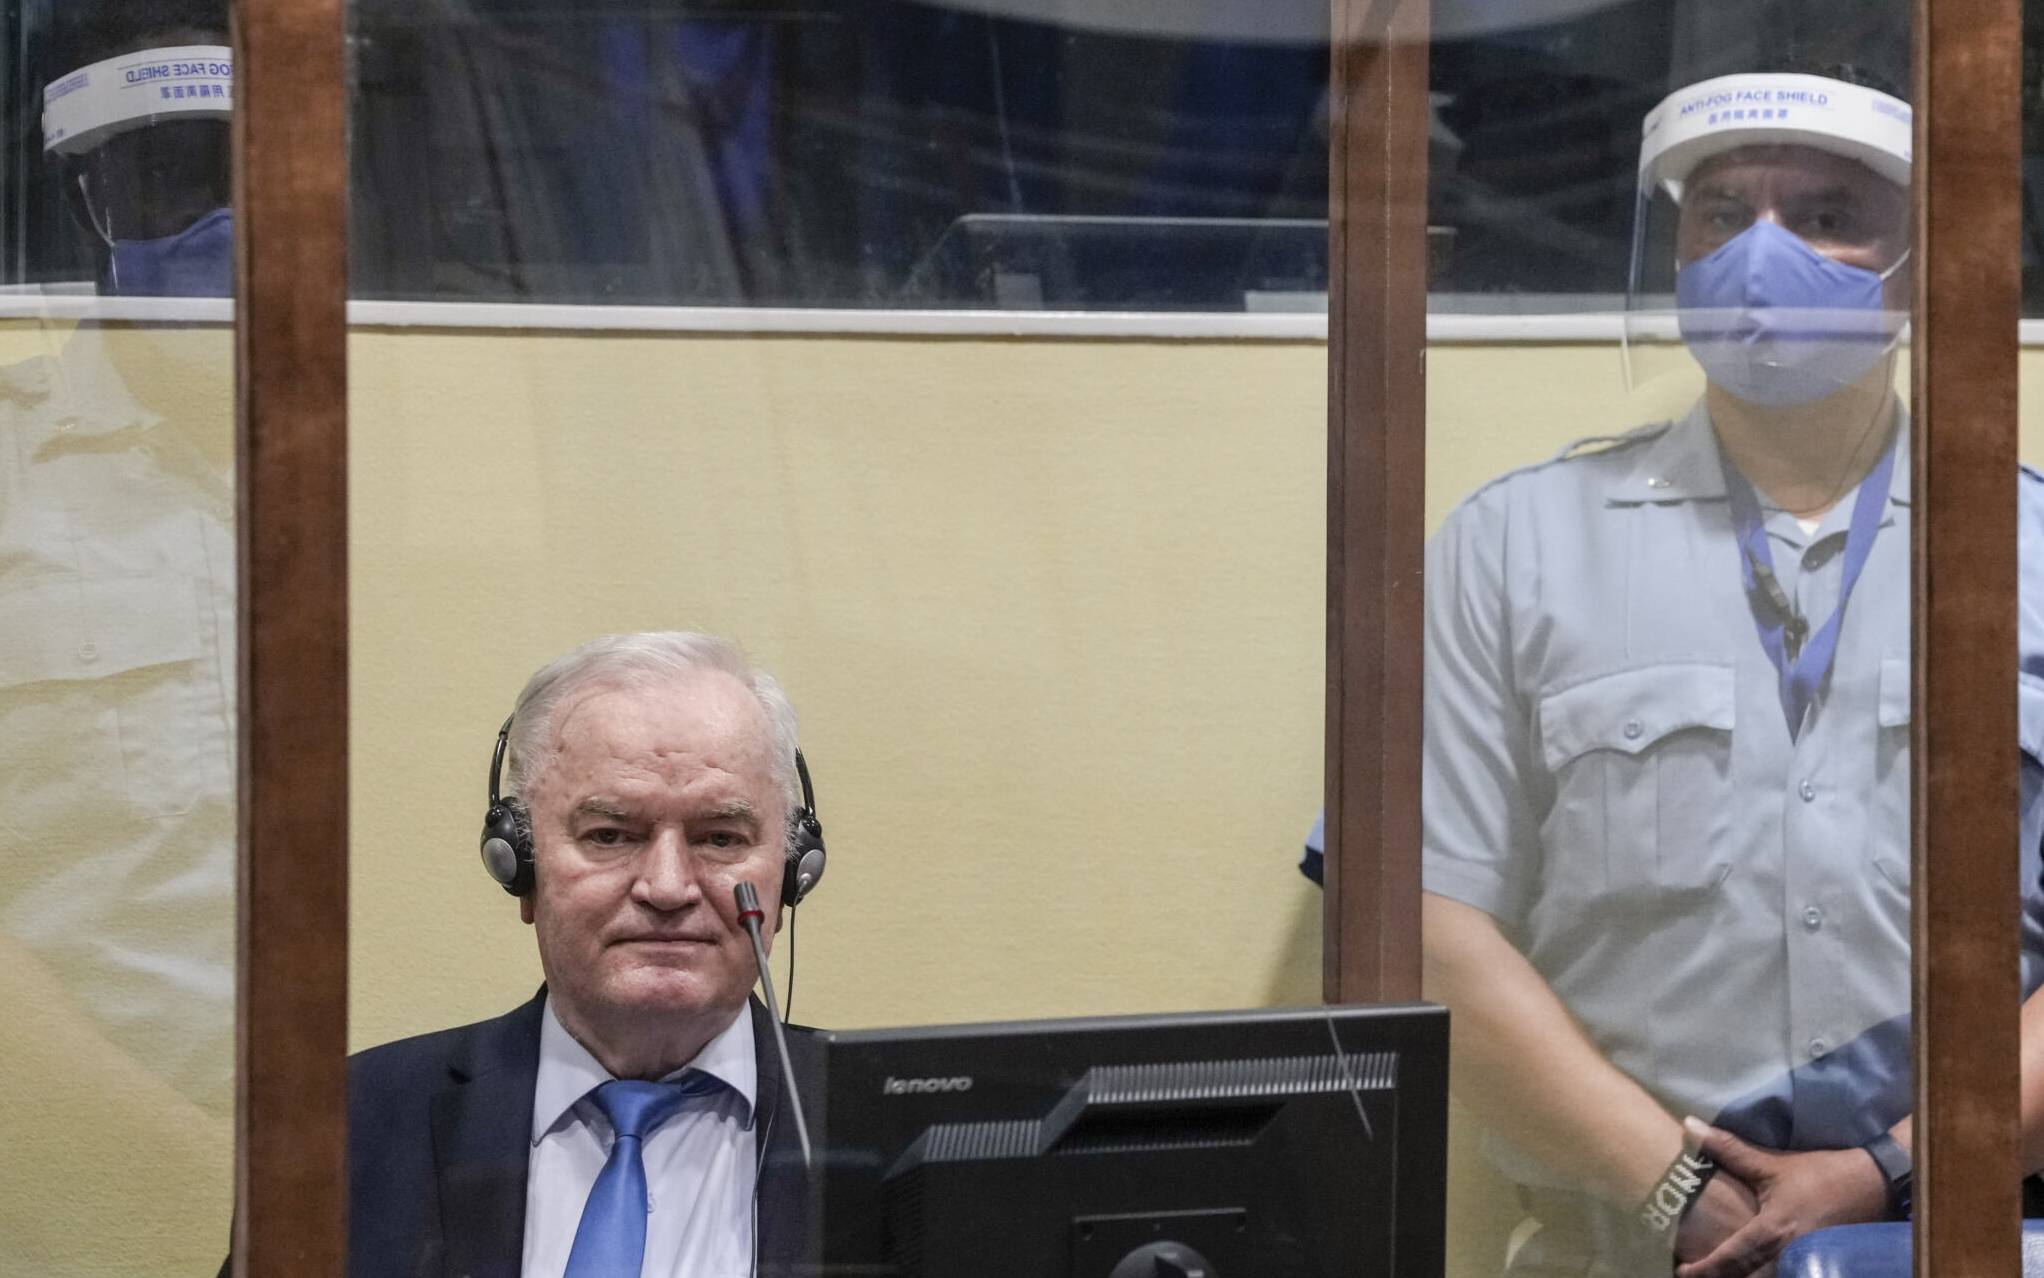 Ex-Bosnian Serb military chief Ratko Mladic looks on from the defendant box prior to the hearing of the final verdict on appeal against his genocide conviction over the 1995 Srebrenica massacre, Europe's worst act of bloodshed since World War II, on June 8, 2021 at the International Residual Mechanism for Criminal Tribunals (IRMCT) in The Hague. (Photo by Peter Dejong / POOL / AFP)